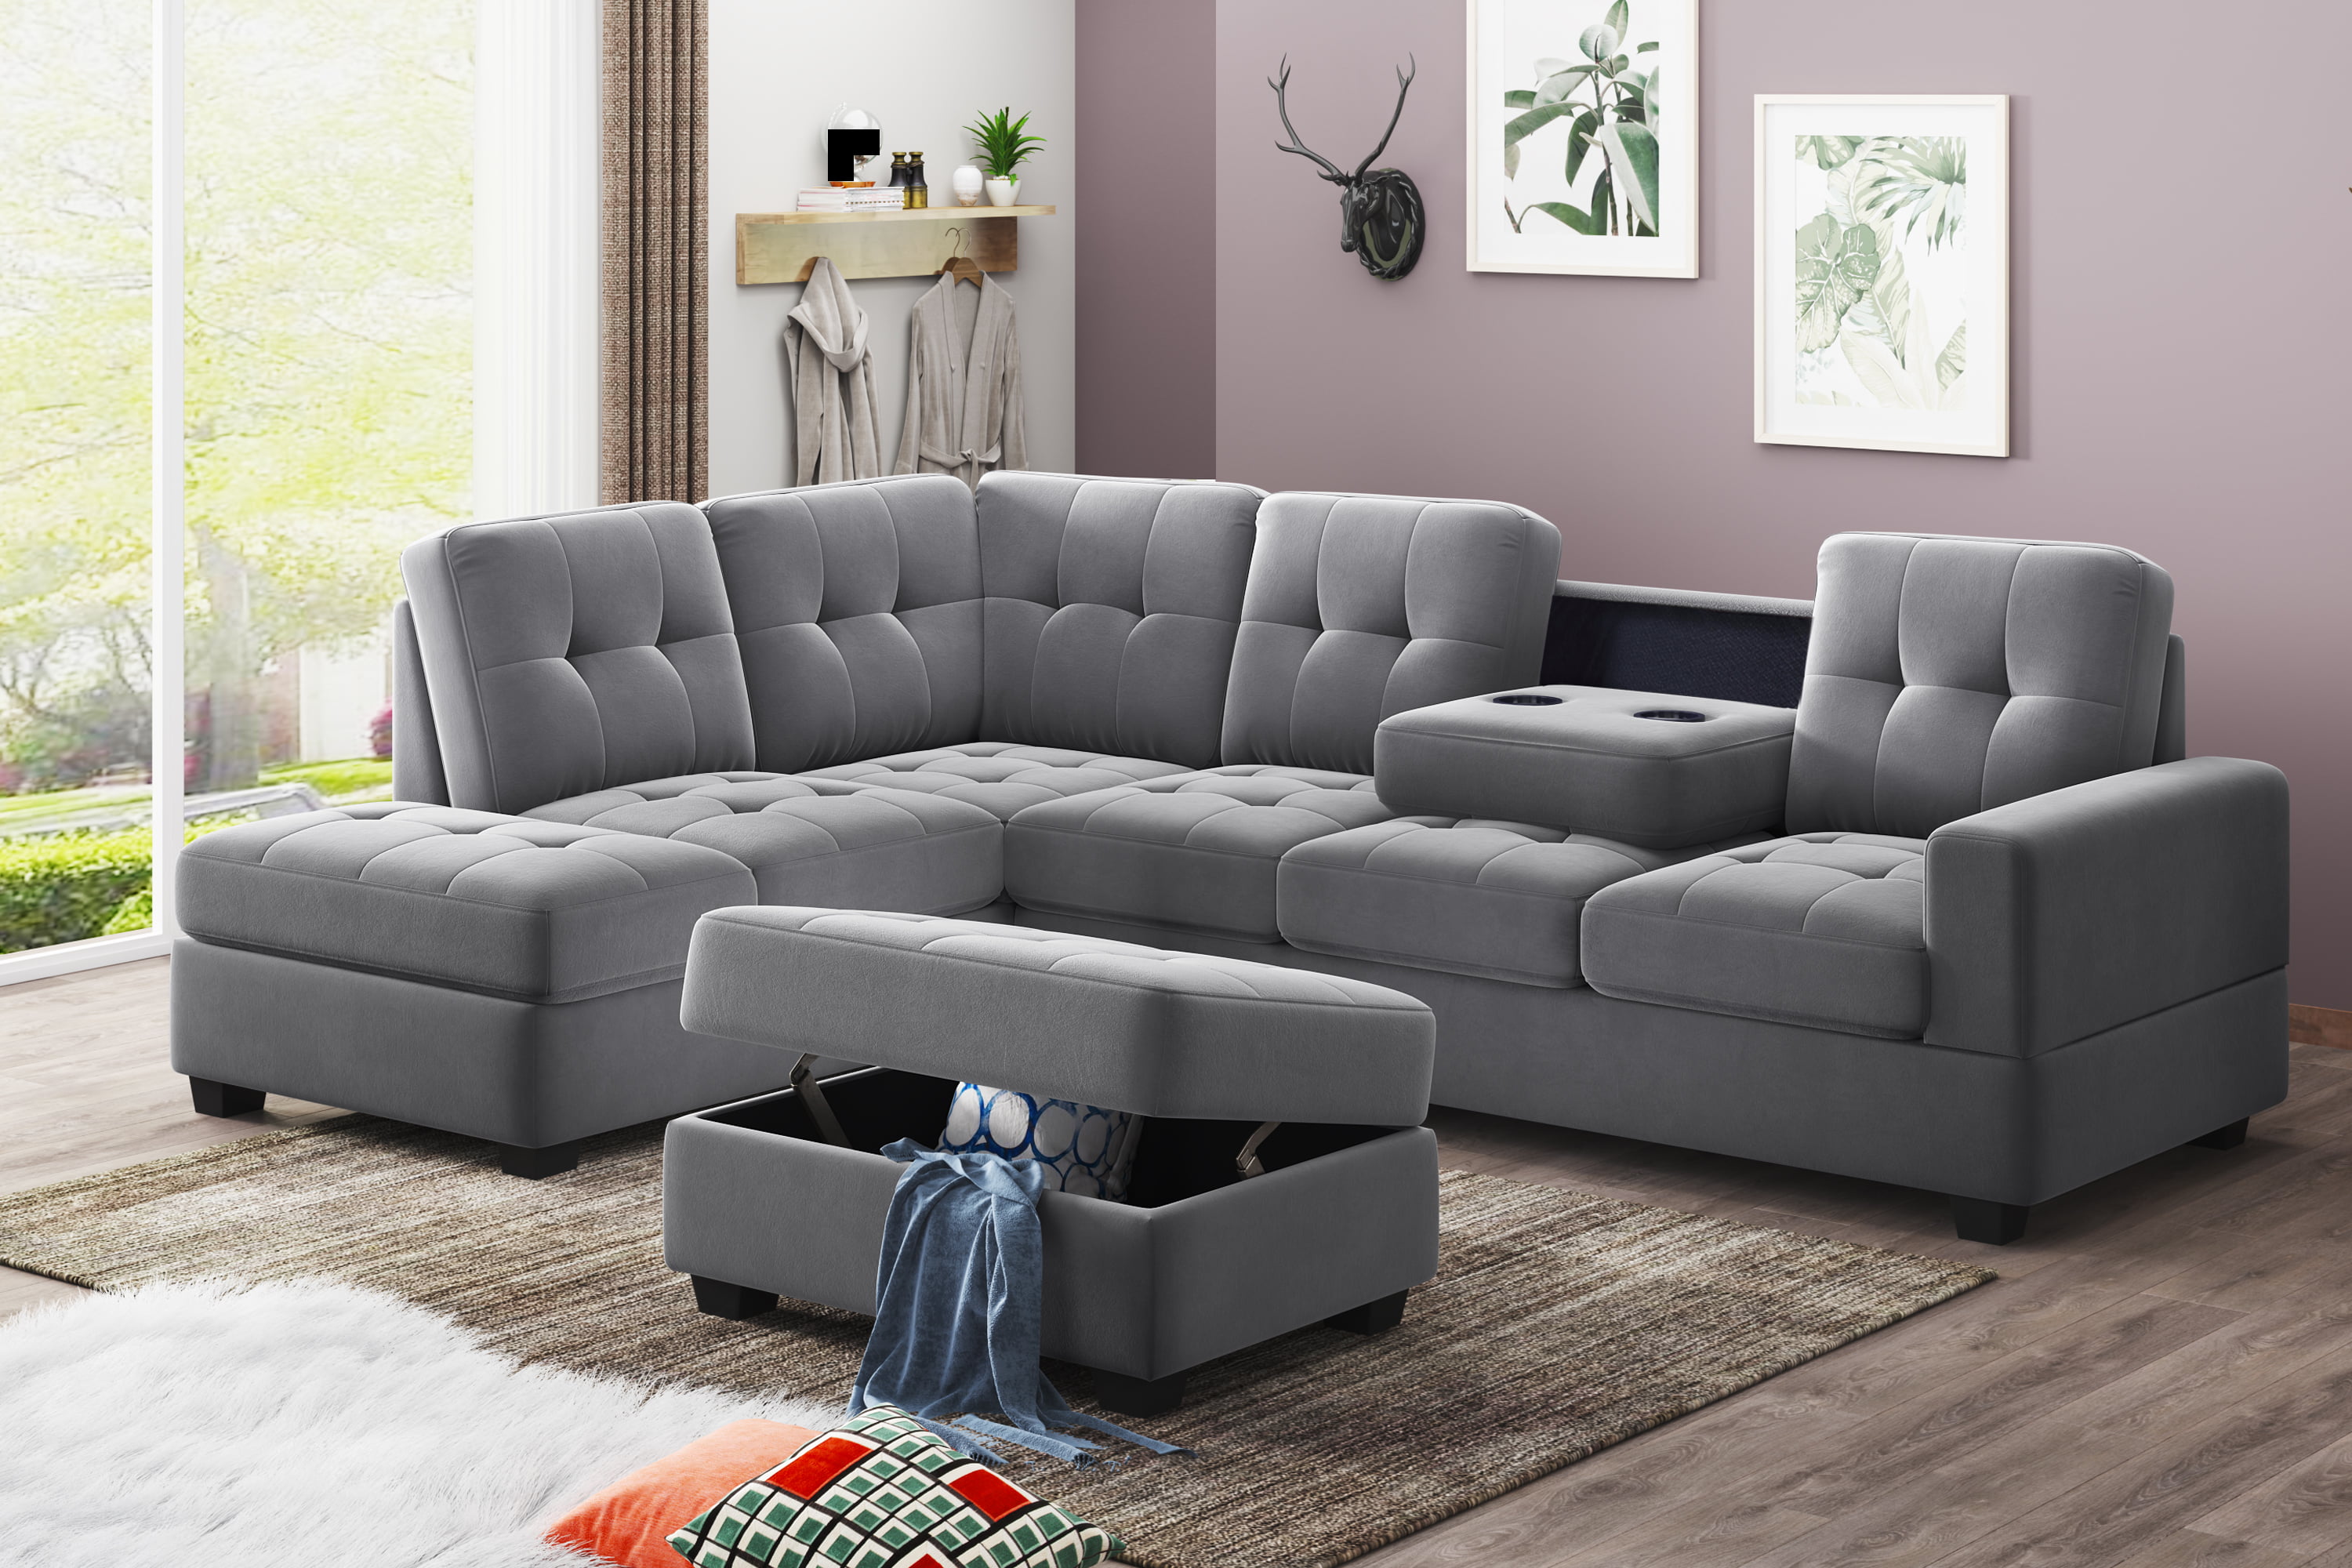 Contemporary Sectional Modern Sofa Microsuede Reversible Chaise &Ottoman From CA 